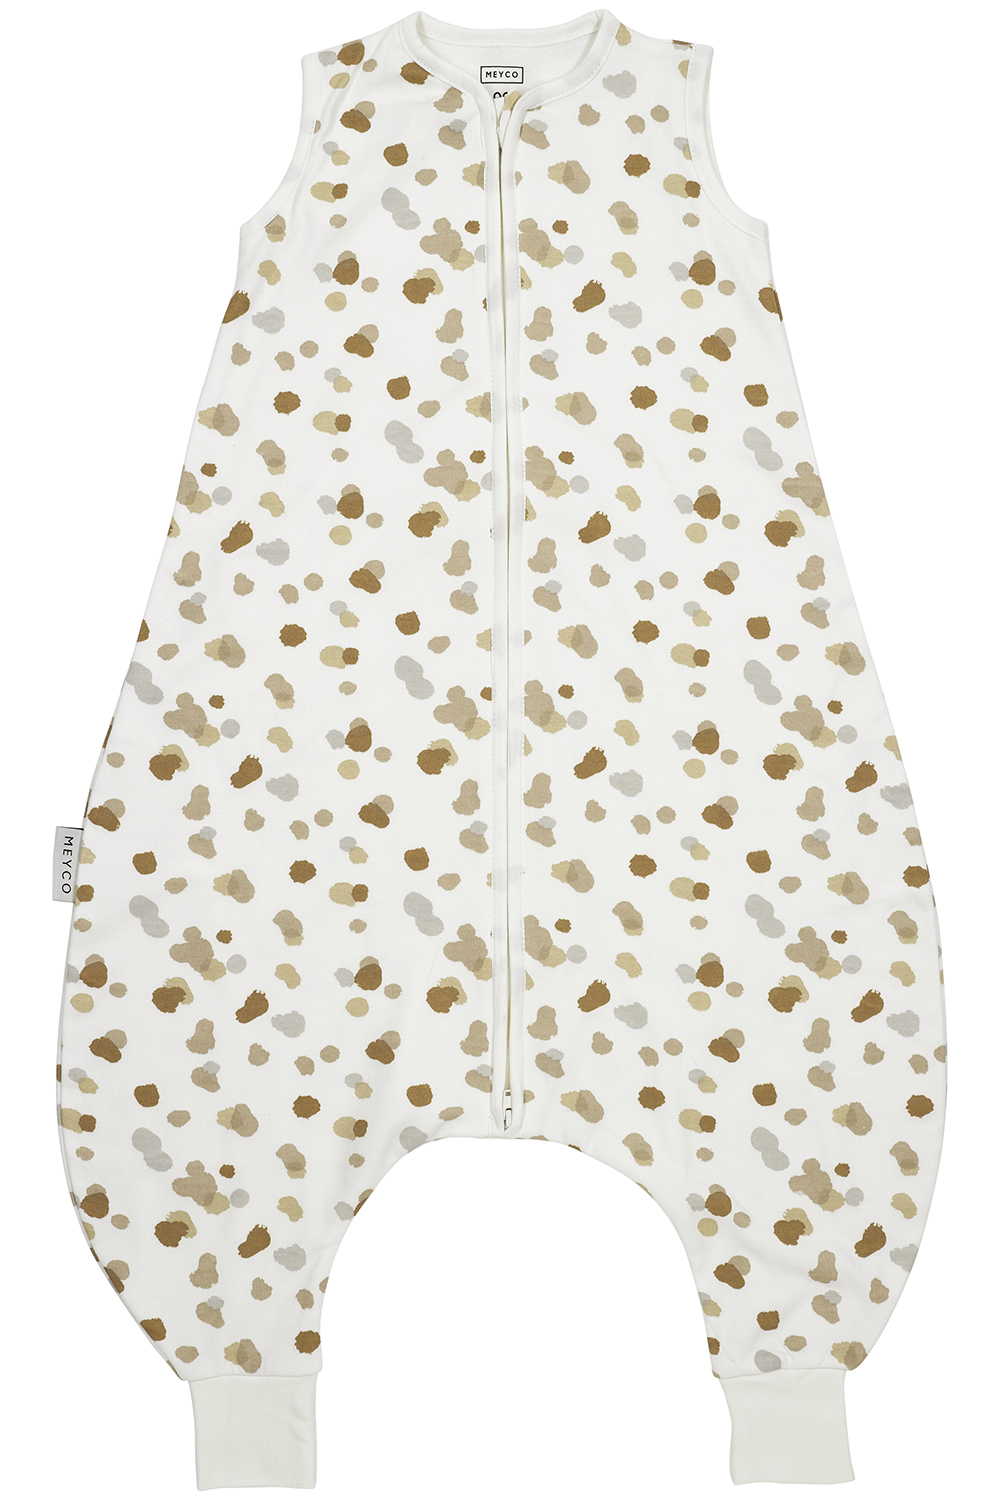 Baby zomer slaapoverall jumper Stains - sand - 80cm